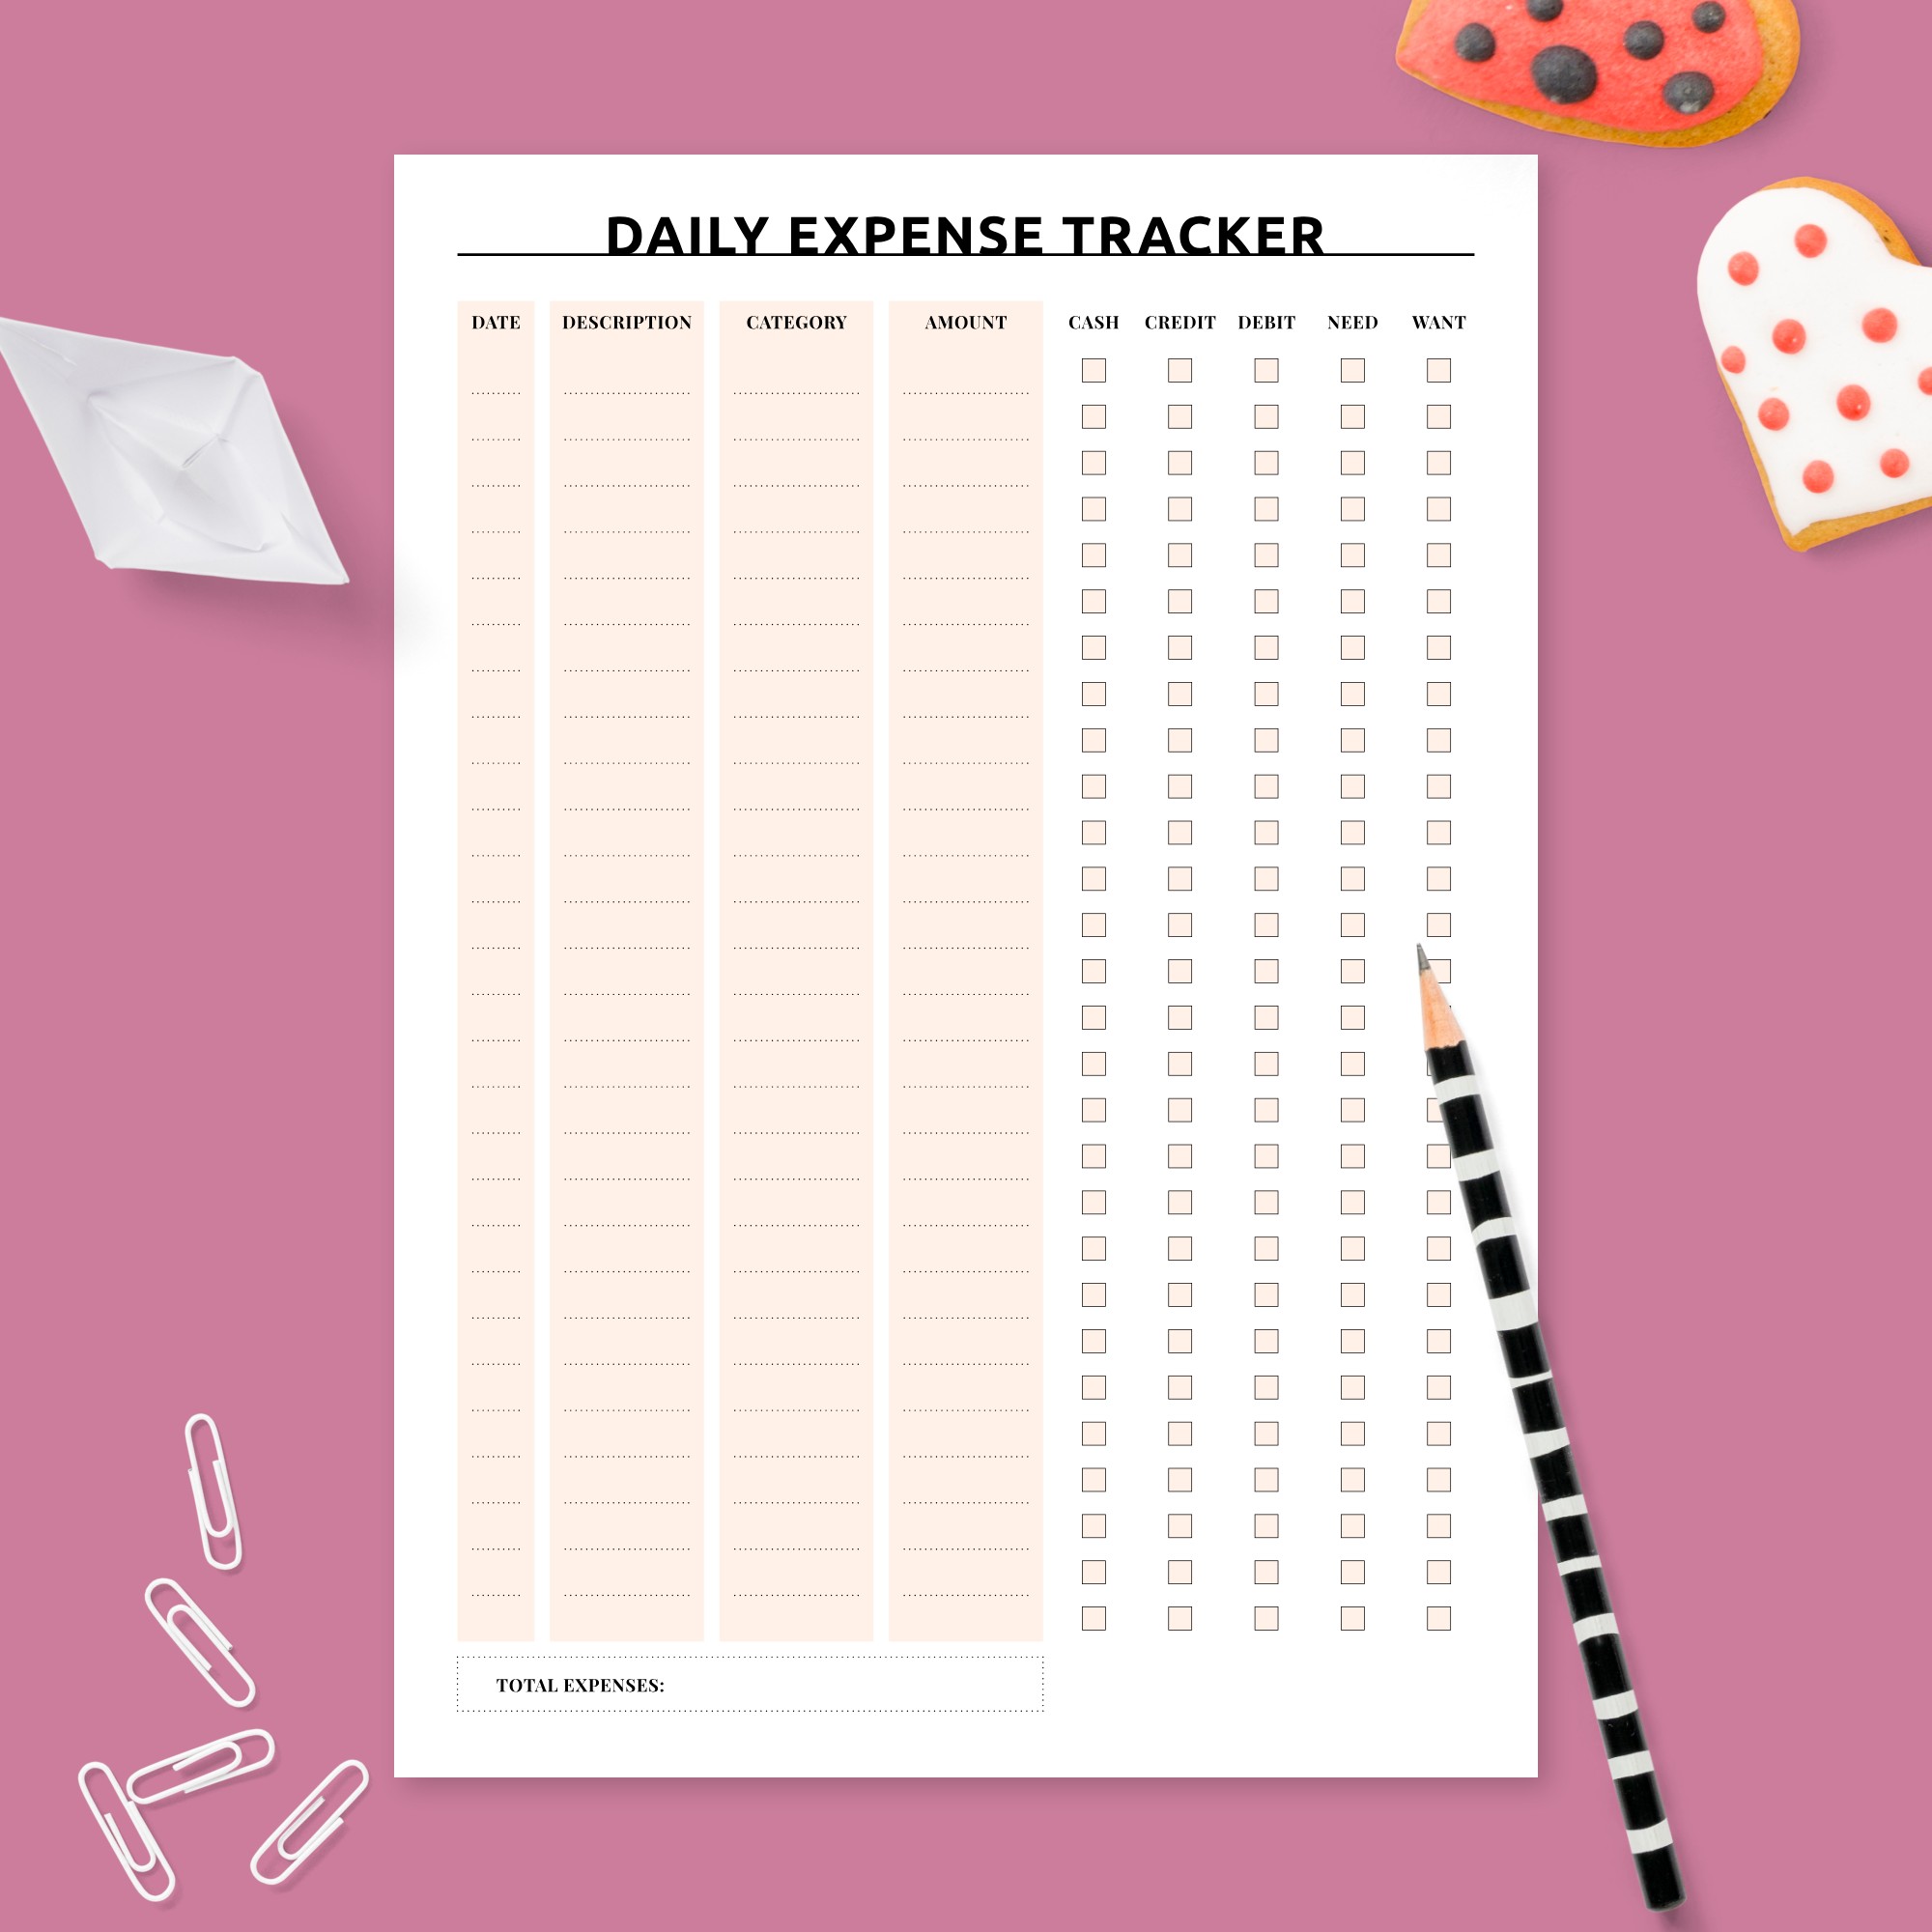 Personal Daily Expense Tracker Template - Printable PDF